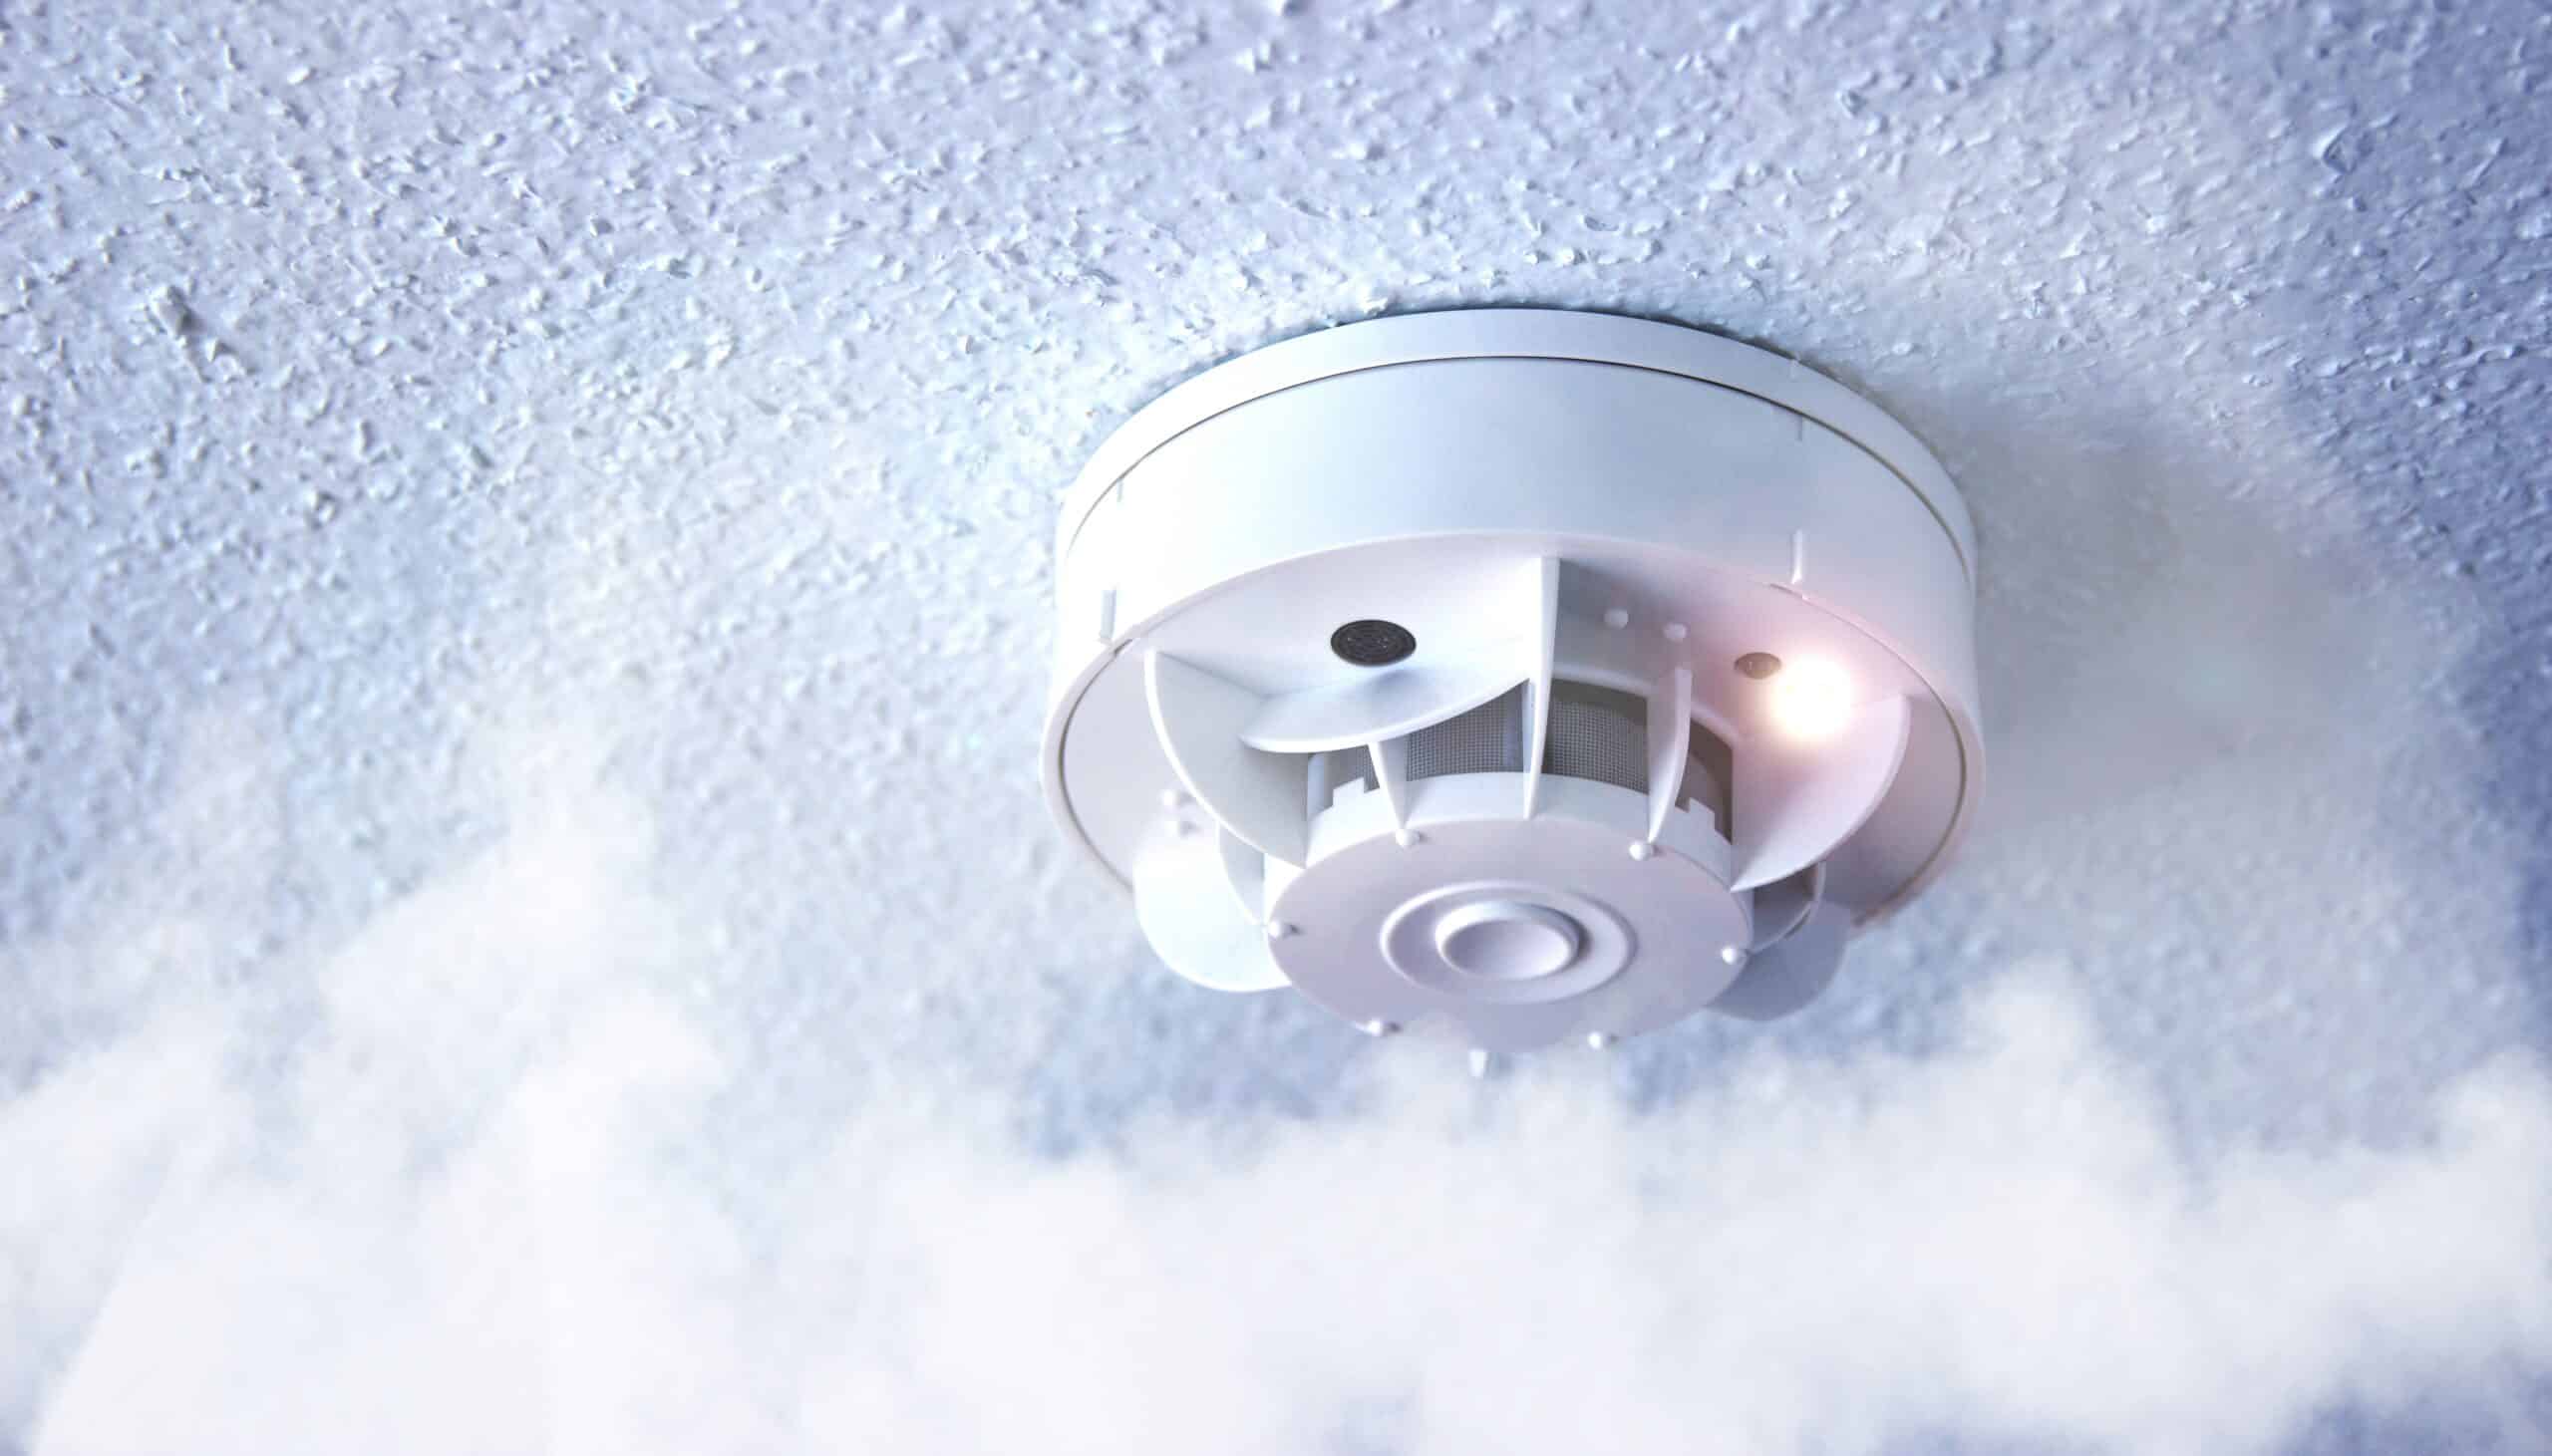 smoke, fire detector. fire protection, with smoke in the foreground.